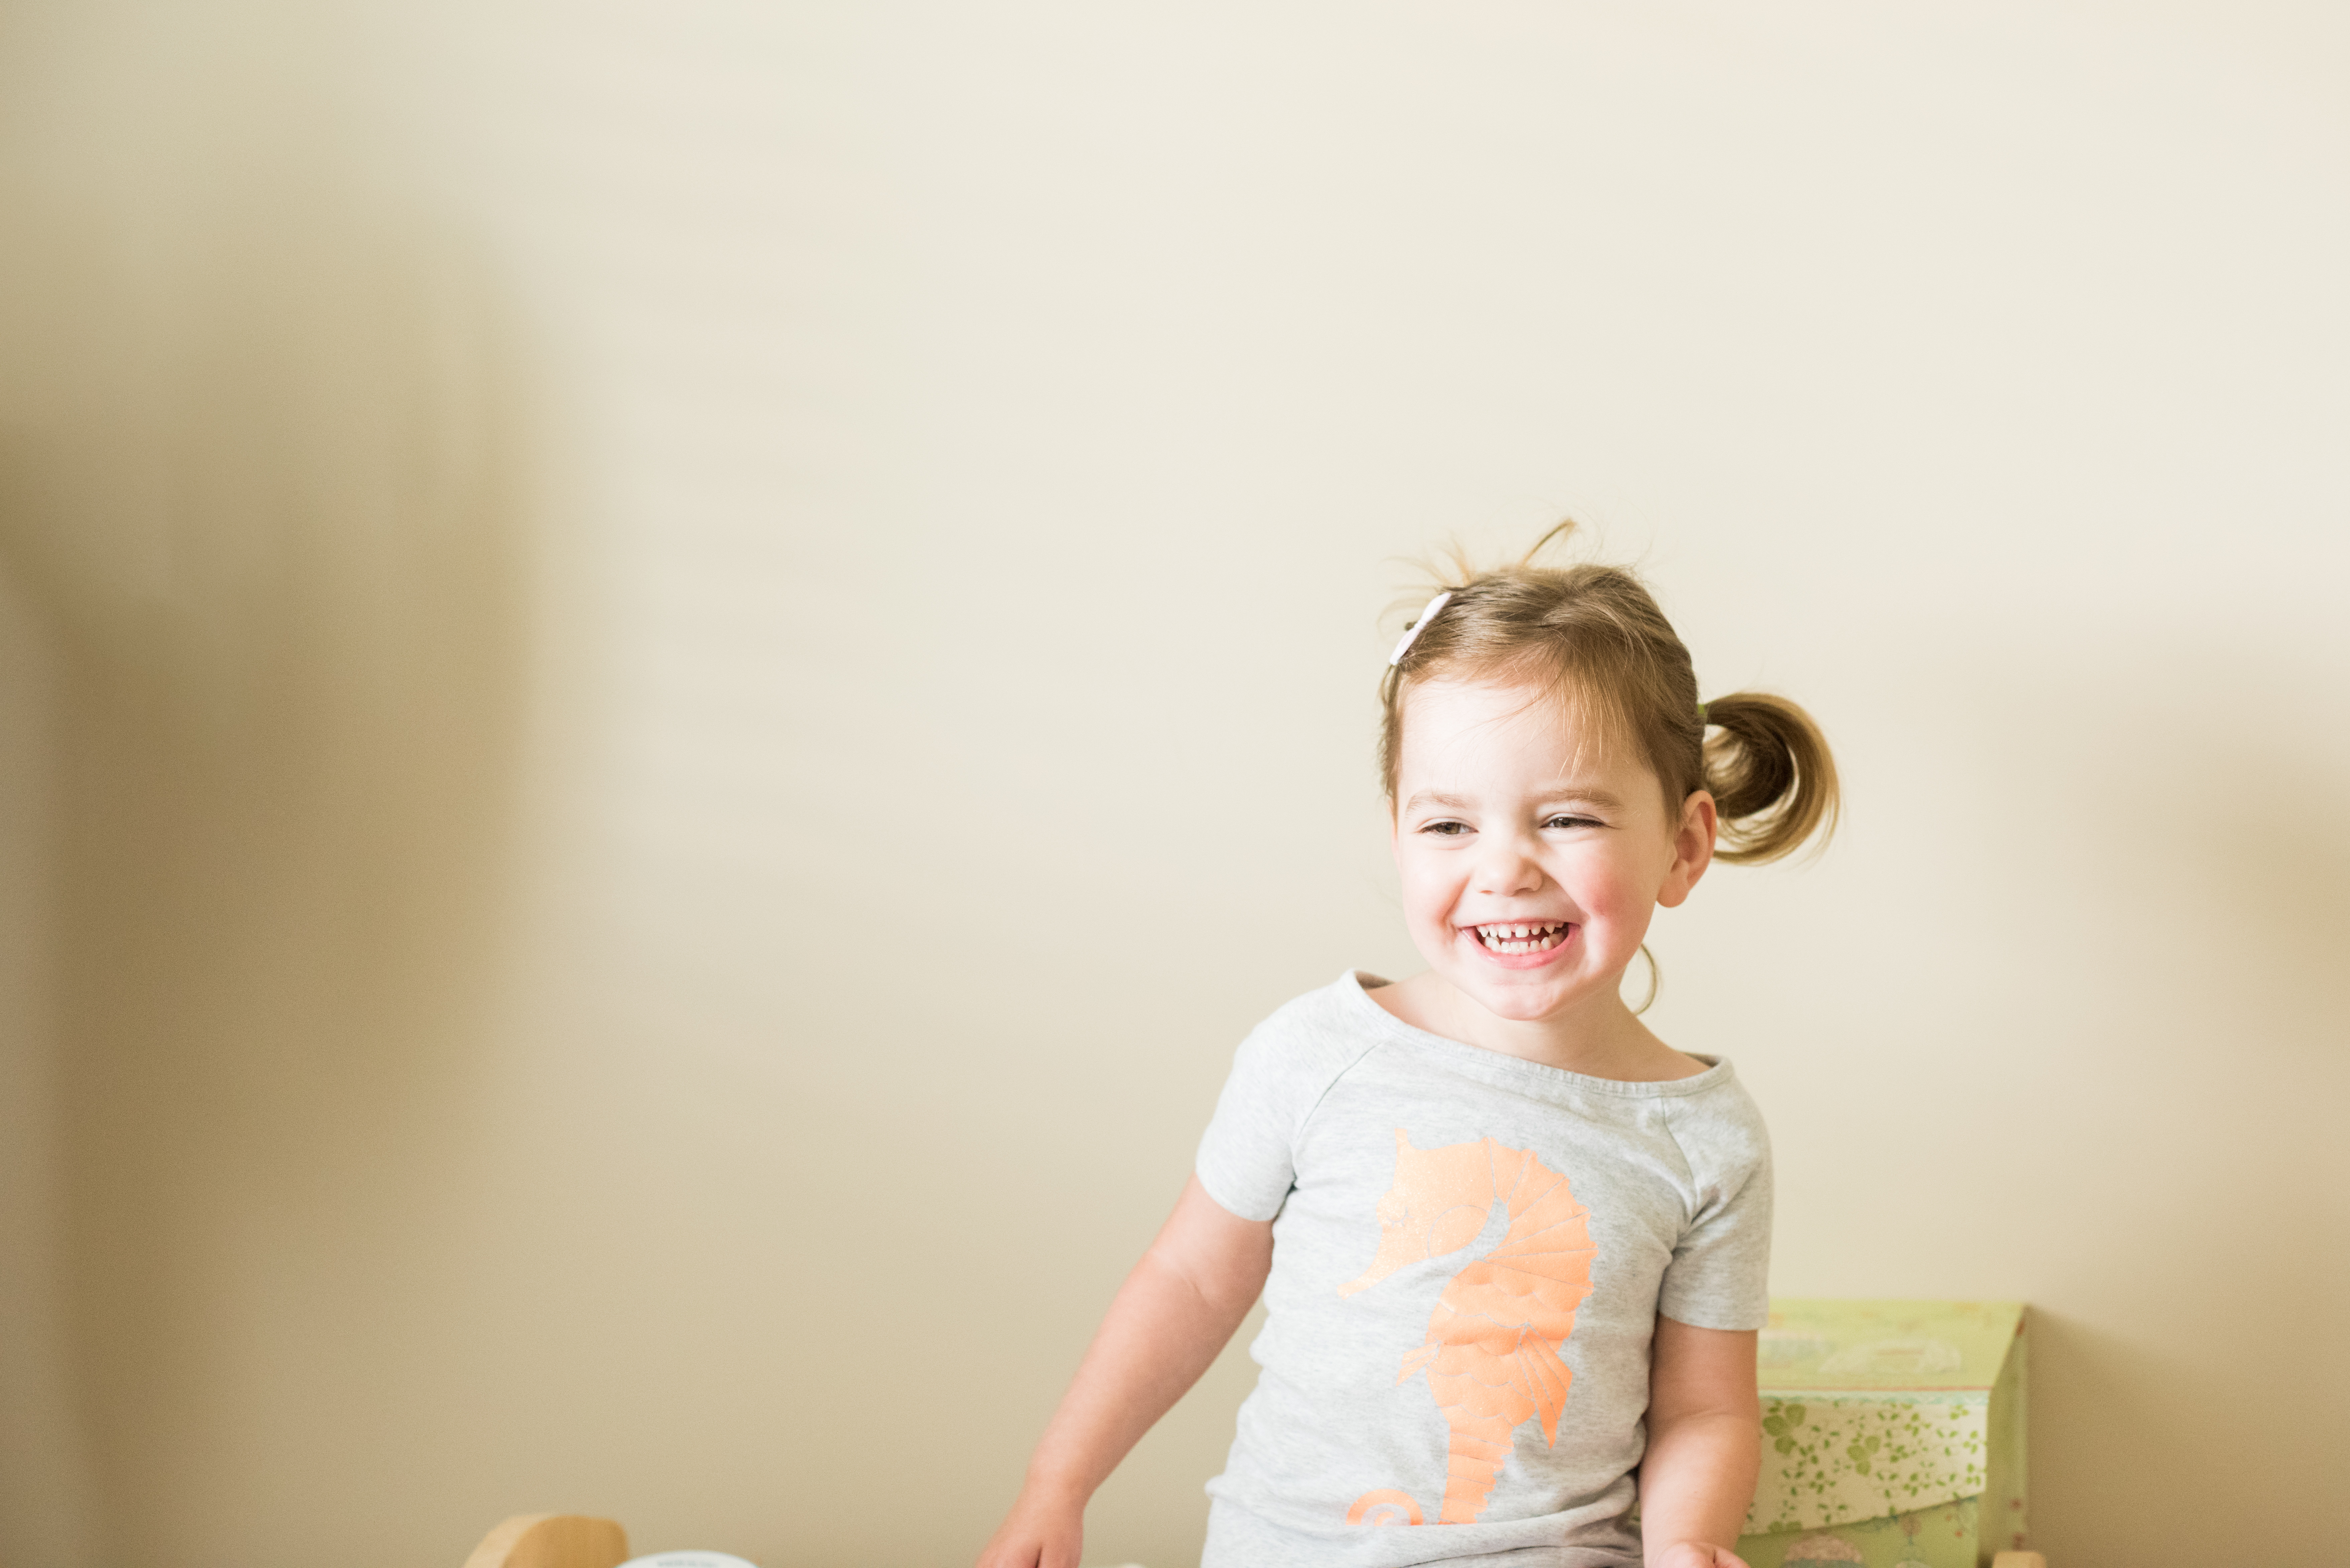 Happy young girl with pigtails in front of neutral background